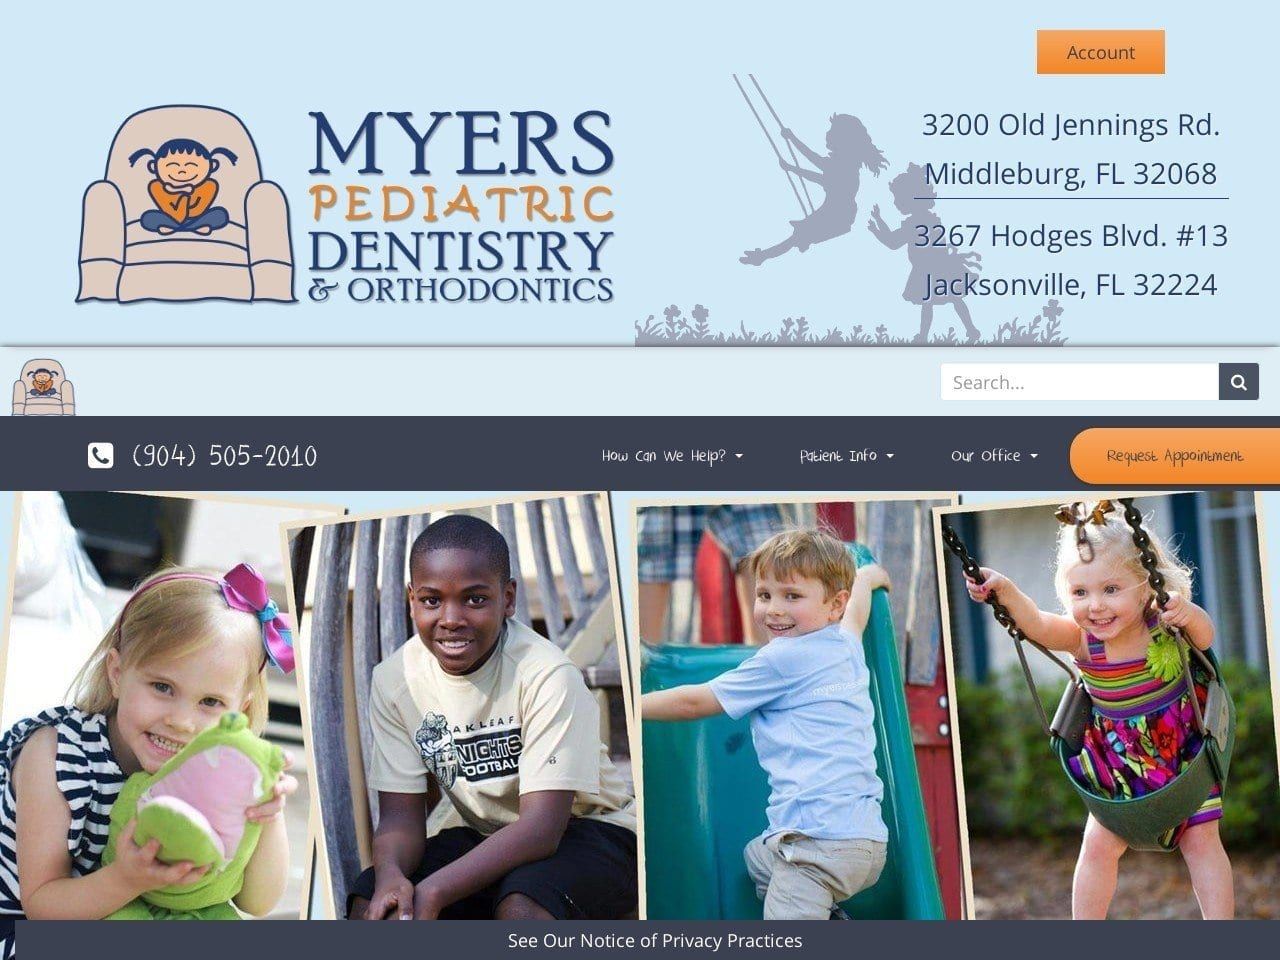 Myers Pediatric Dentistry & Orthodontics Website Screenshot from tooth2tooth.com